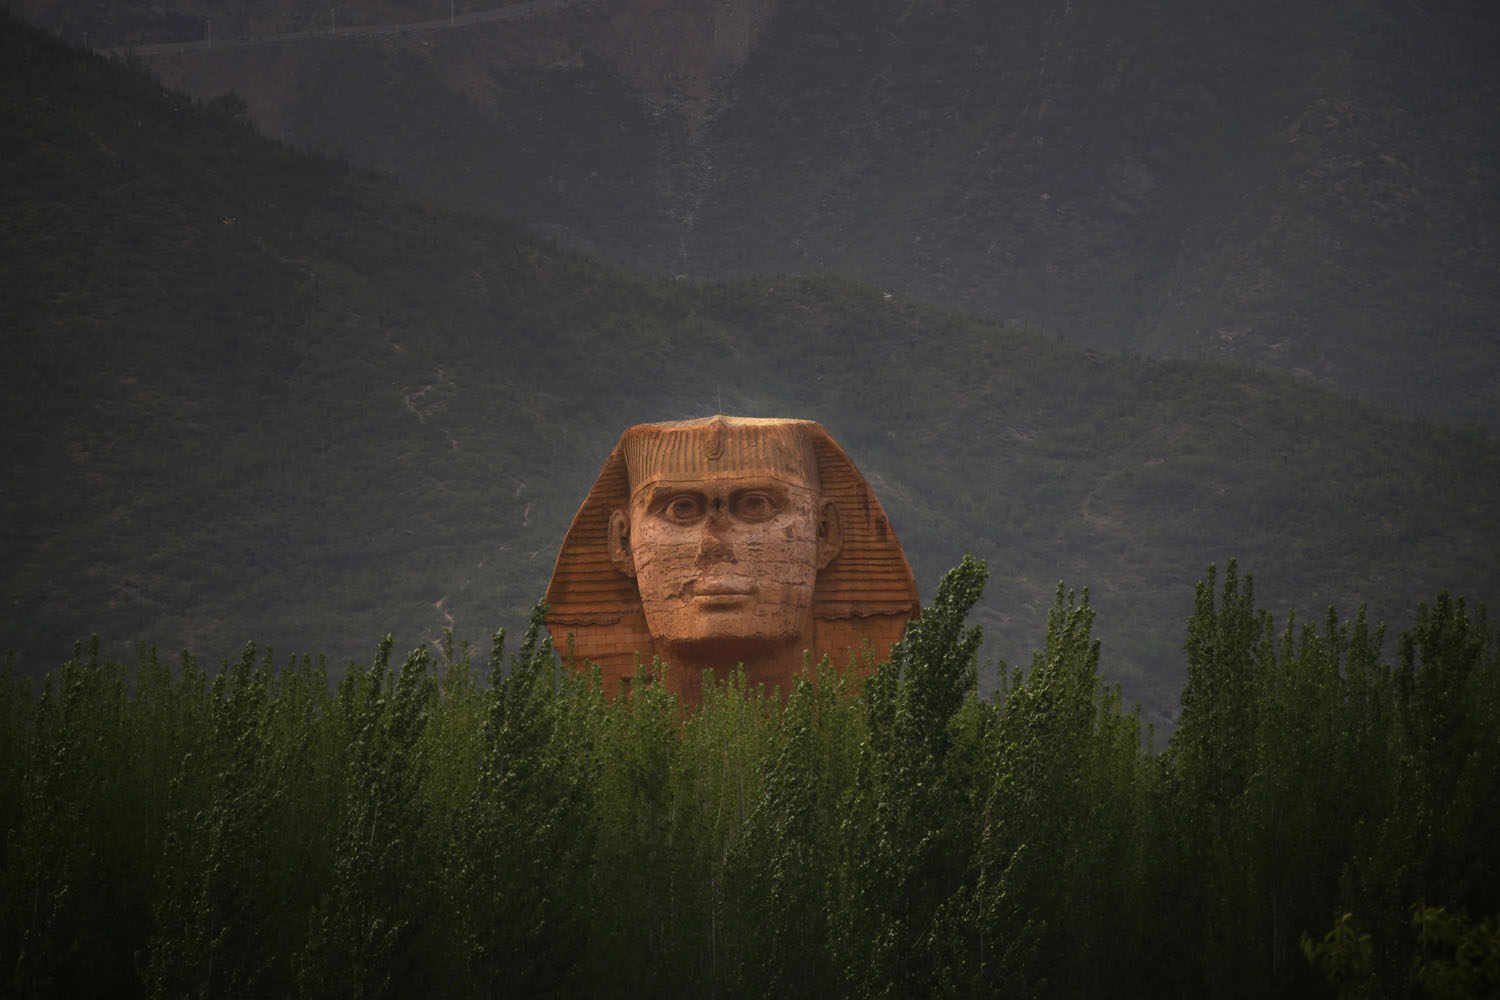 The head of a full-scale replica of the Sphinx, which is part of an unfinished theme park, behind trees on the outskirts of Shijiazhuang, Hebei province, China, on May 15, 2014.